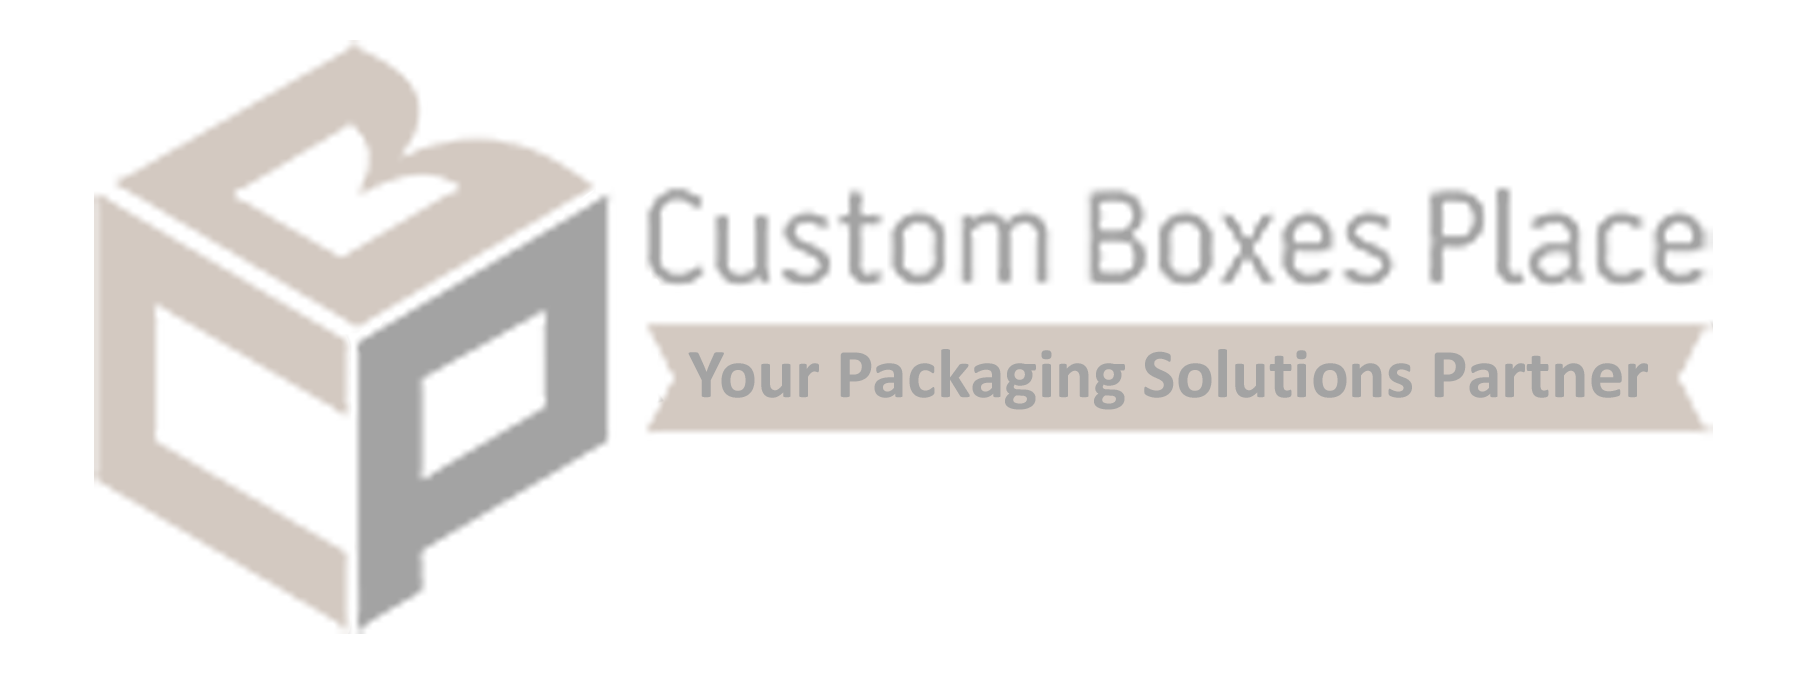 custom boxes place